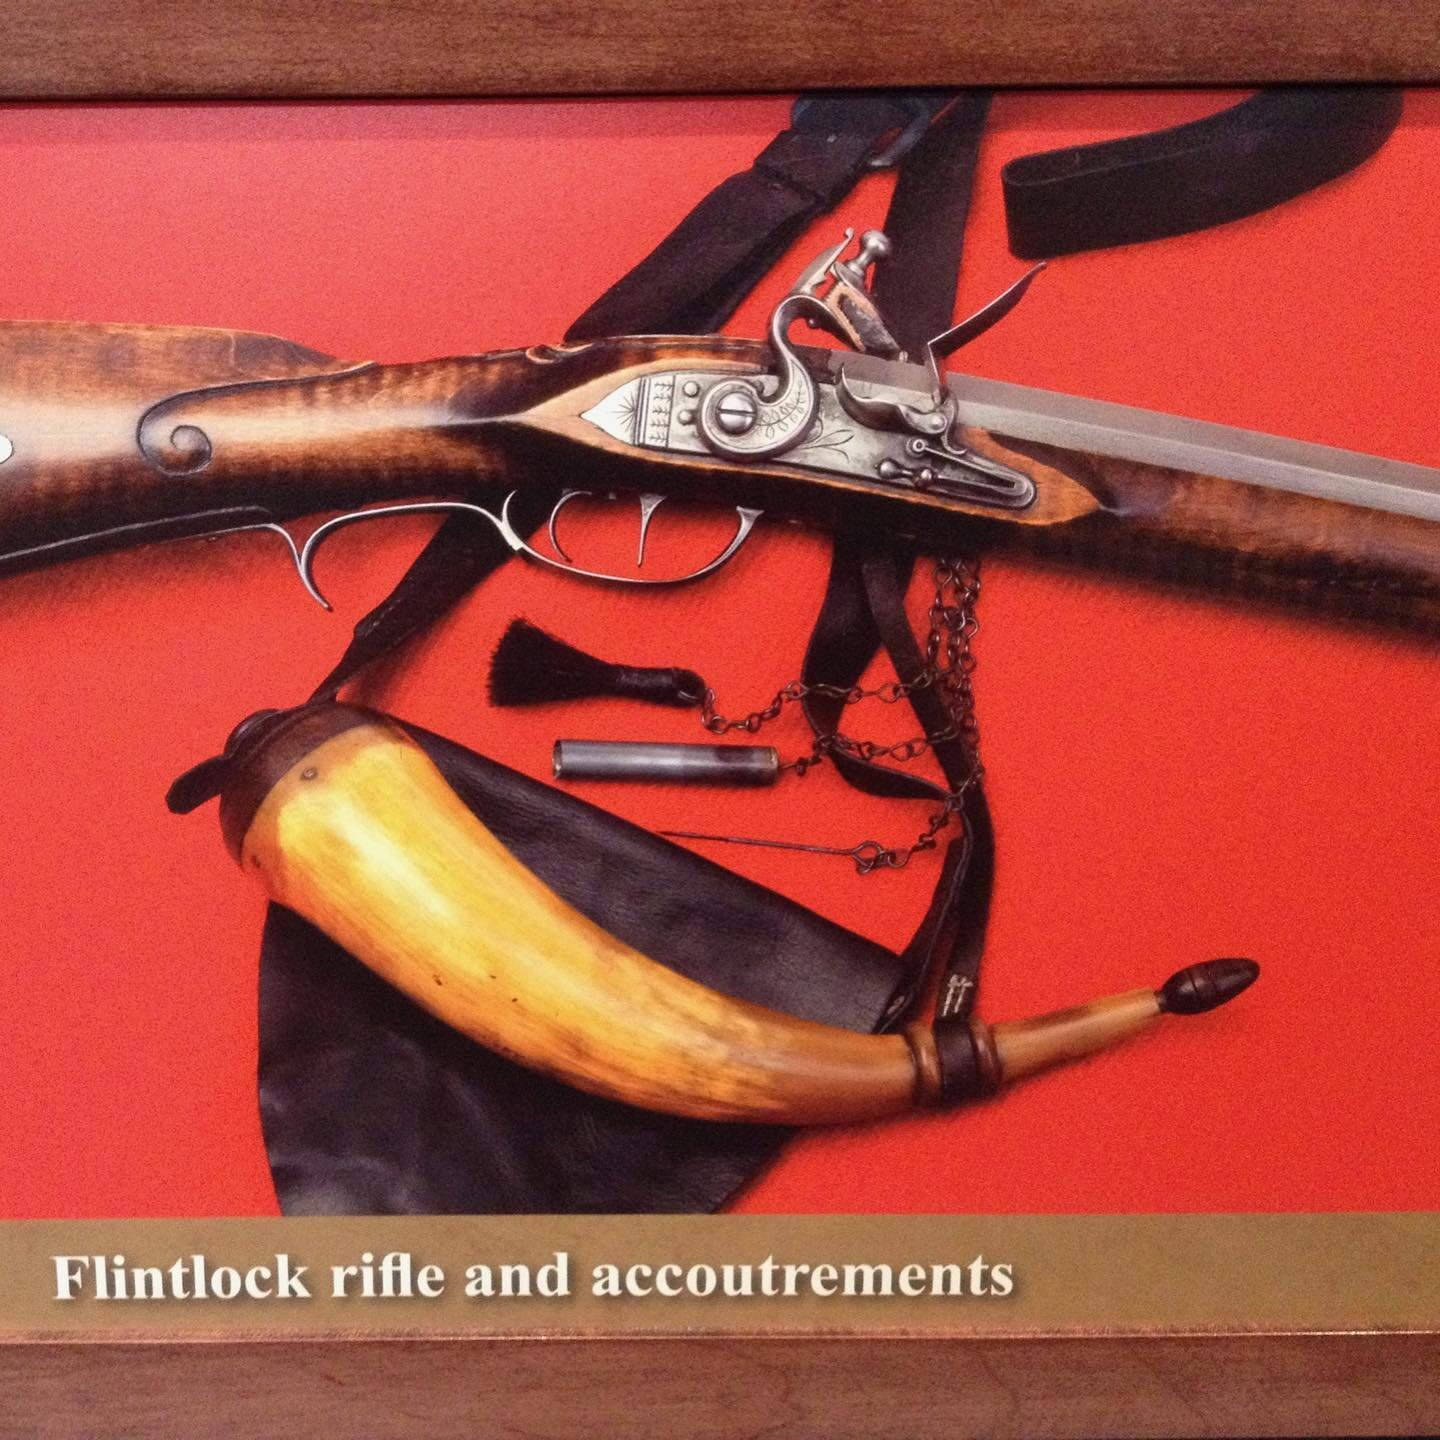 Firearms technology always advanced over the years in history. The flint-lock muzzleloading firearm was a vast improvement over the complicated and expensive design of the wheel-lock. The powder horn is how they carried the black powder readily acces